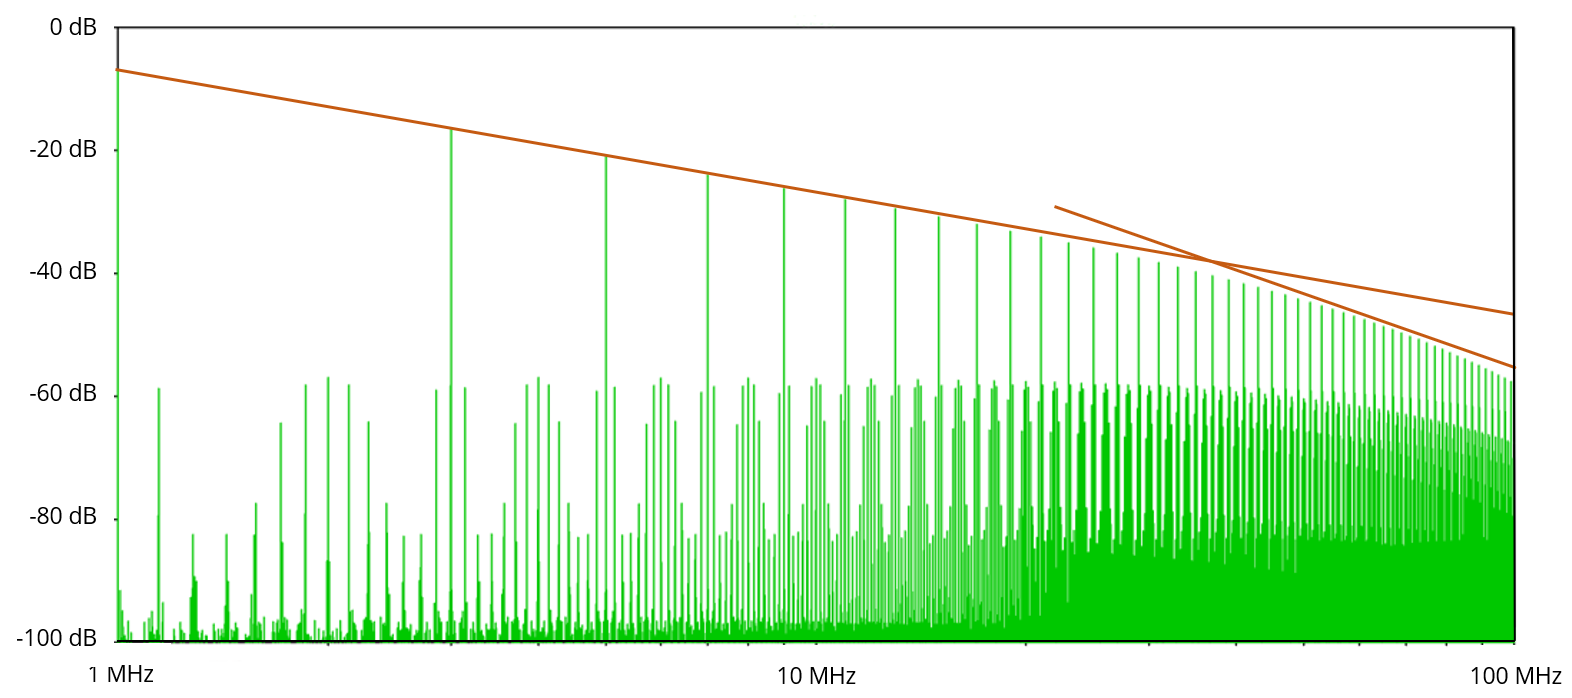 A plot of the harmonics of a 1-MHz PWM Signal from 1 MHz to 100 MHz